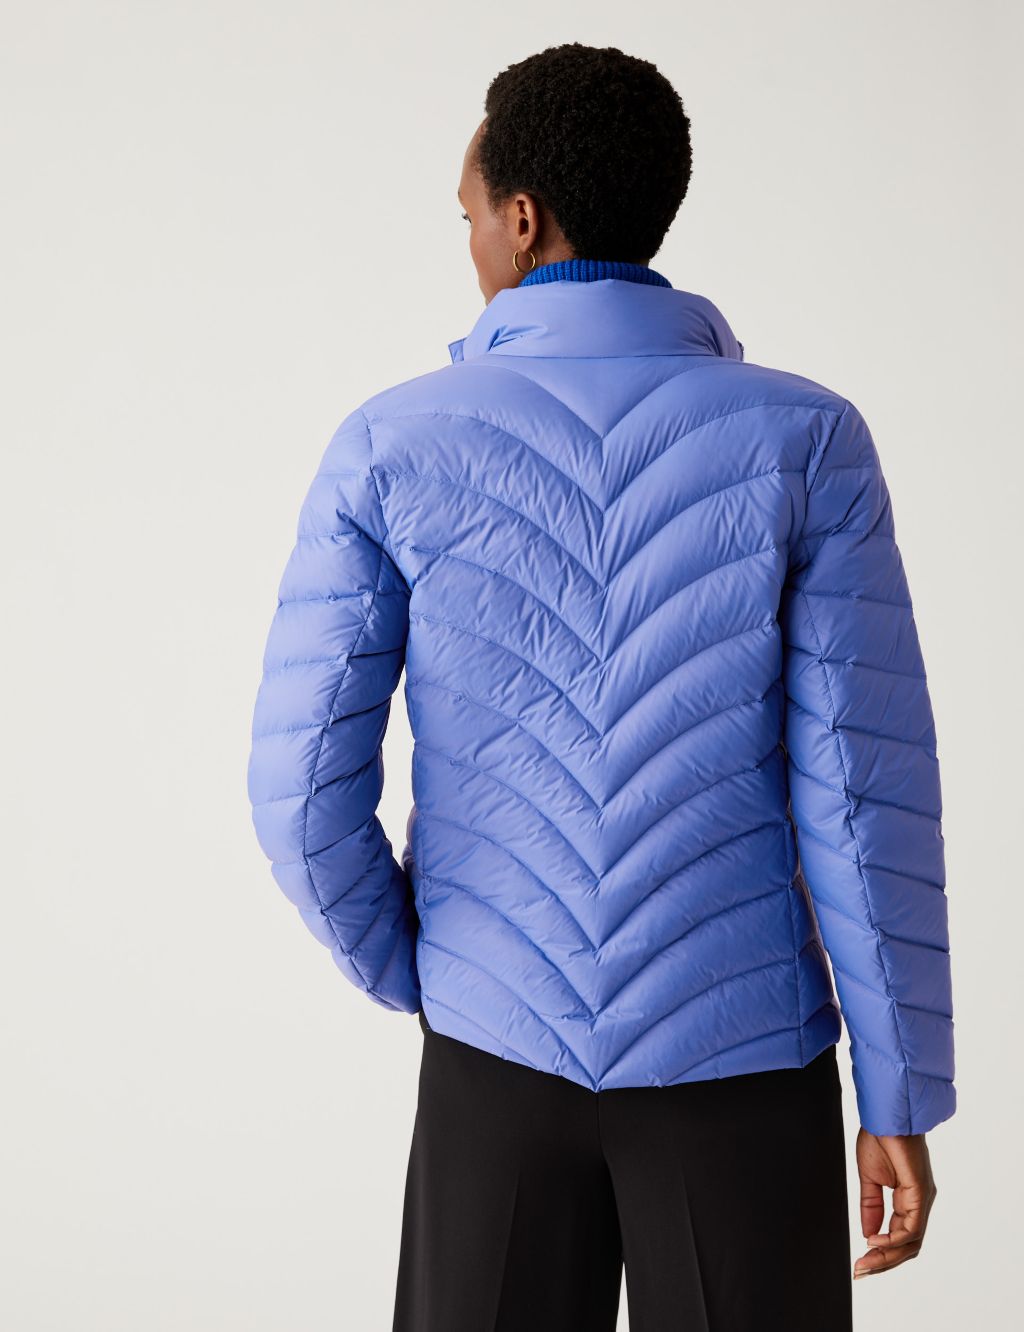 Feather & Down Packaway Puffer Jacket image 7